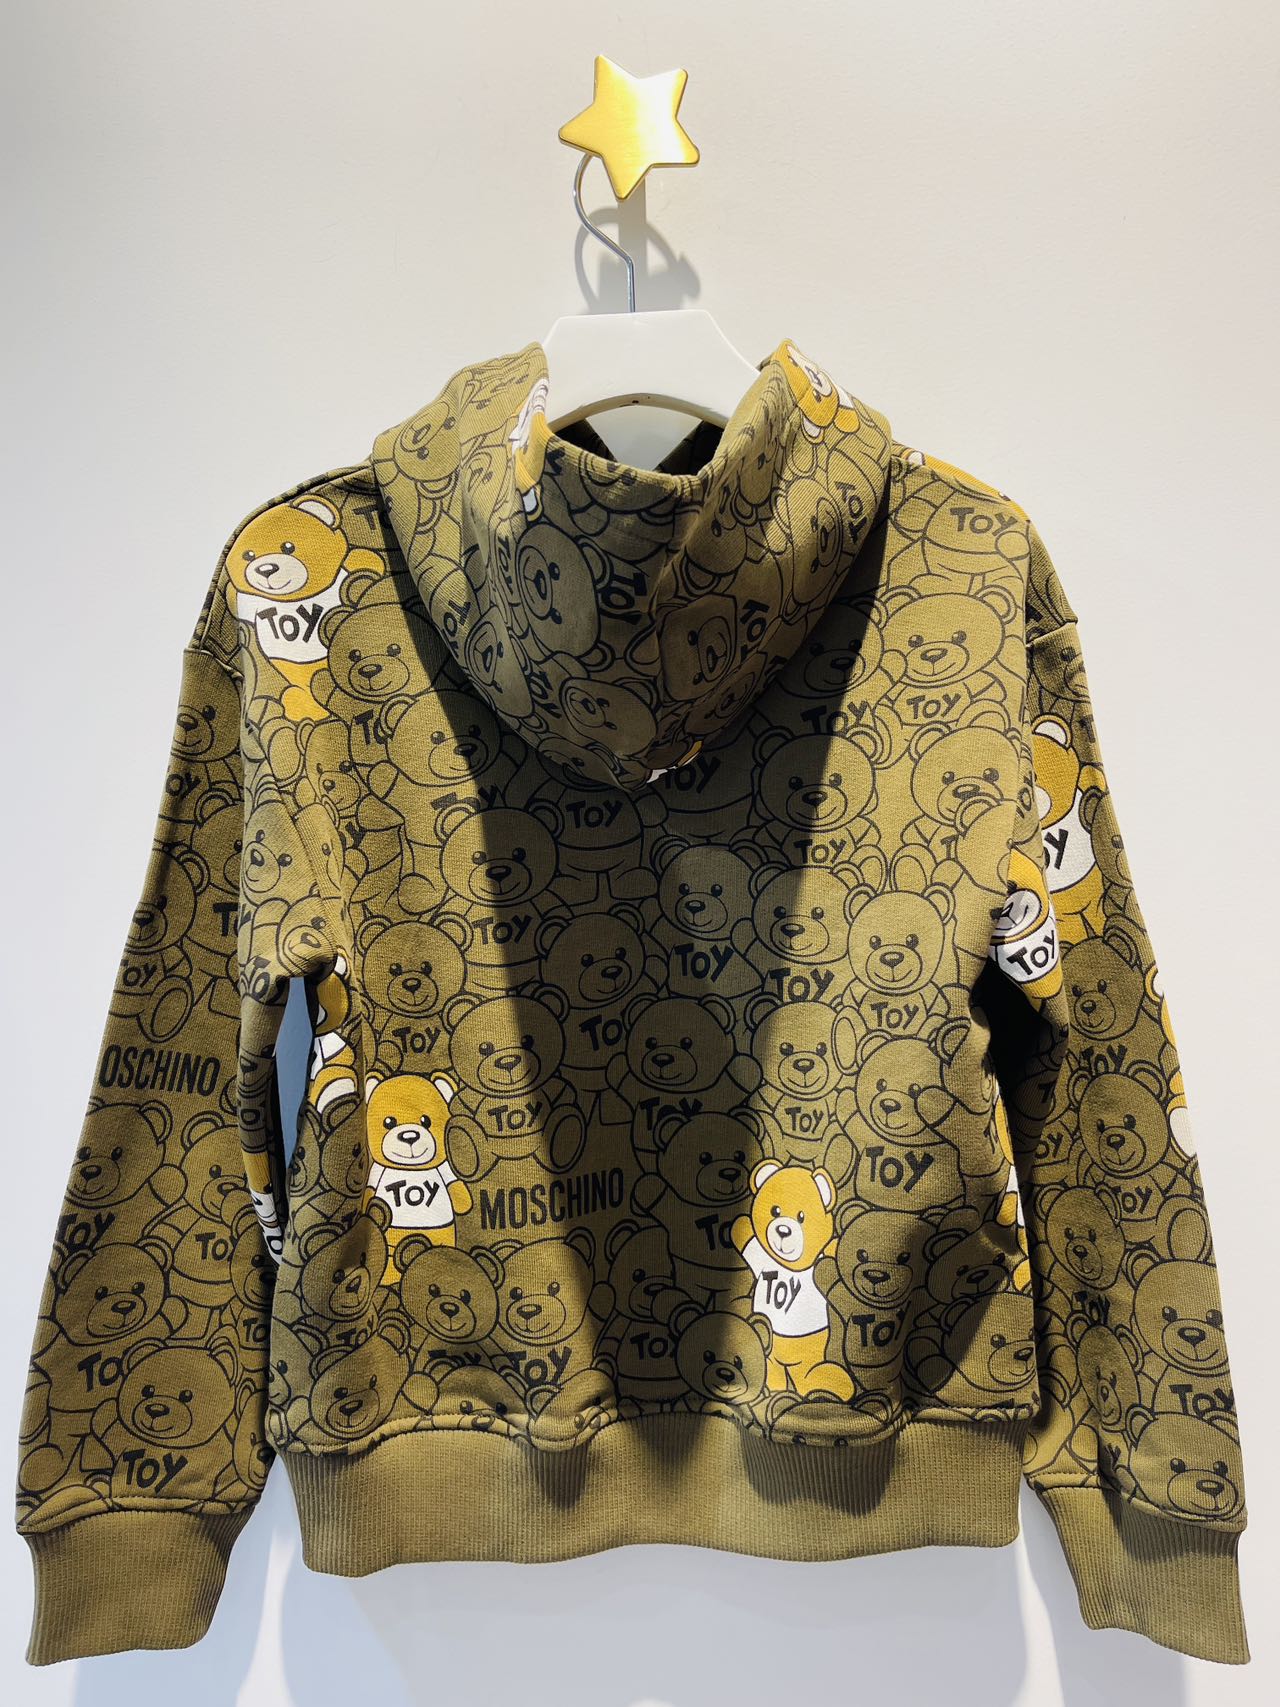 Moschino Hooded Sweatshirt with Allover Printed Bear Dark Oliver